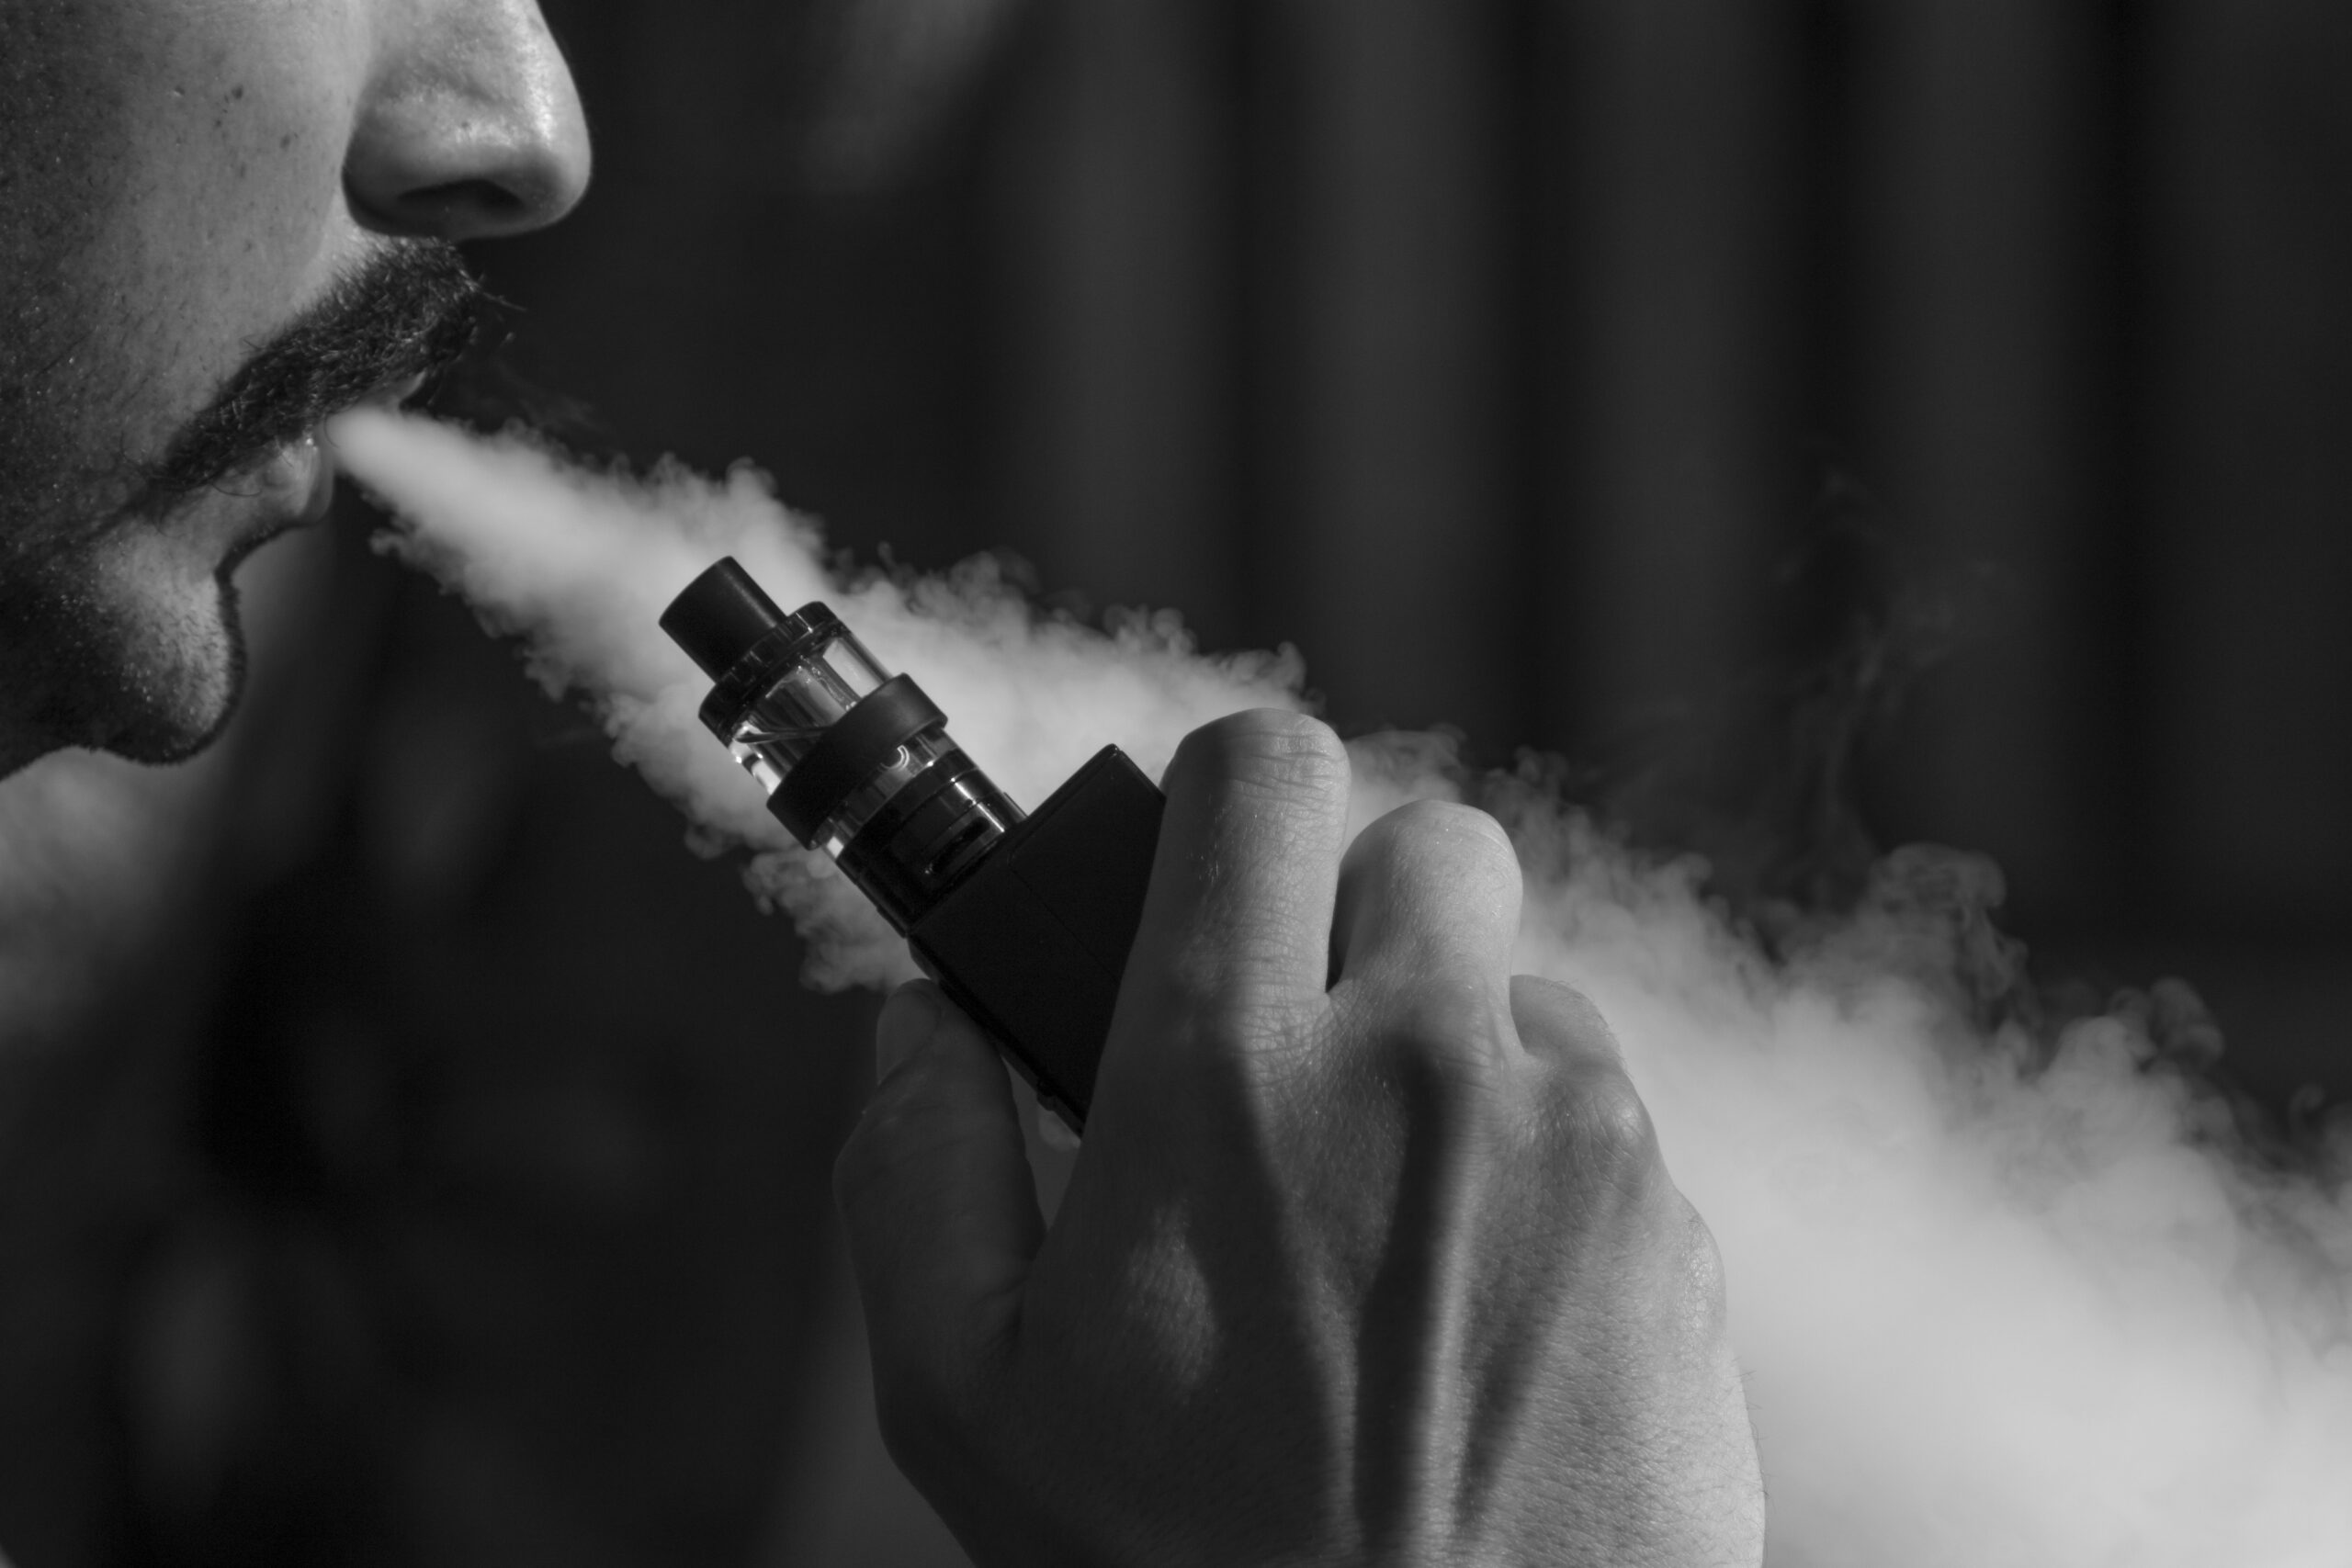 HMRC will use digital channels for new vape duty to ‘reduce fraud and error’